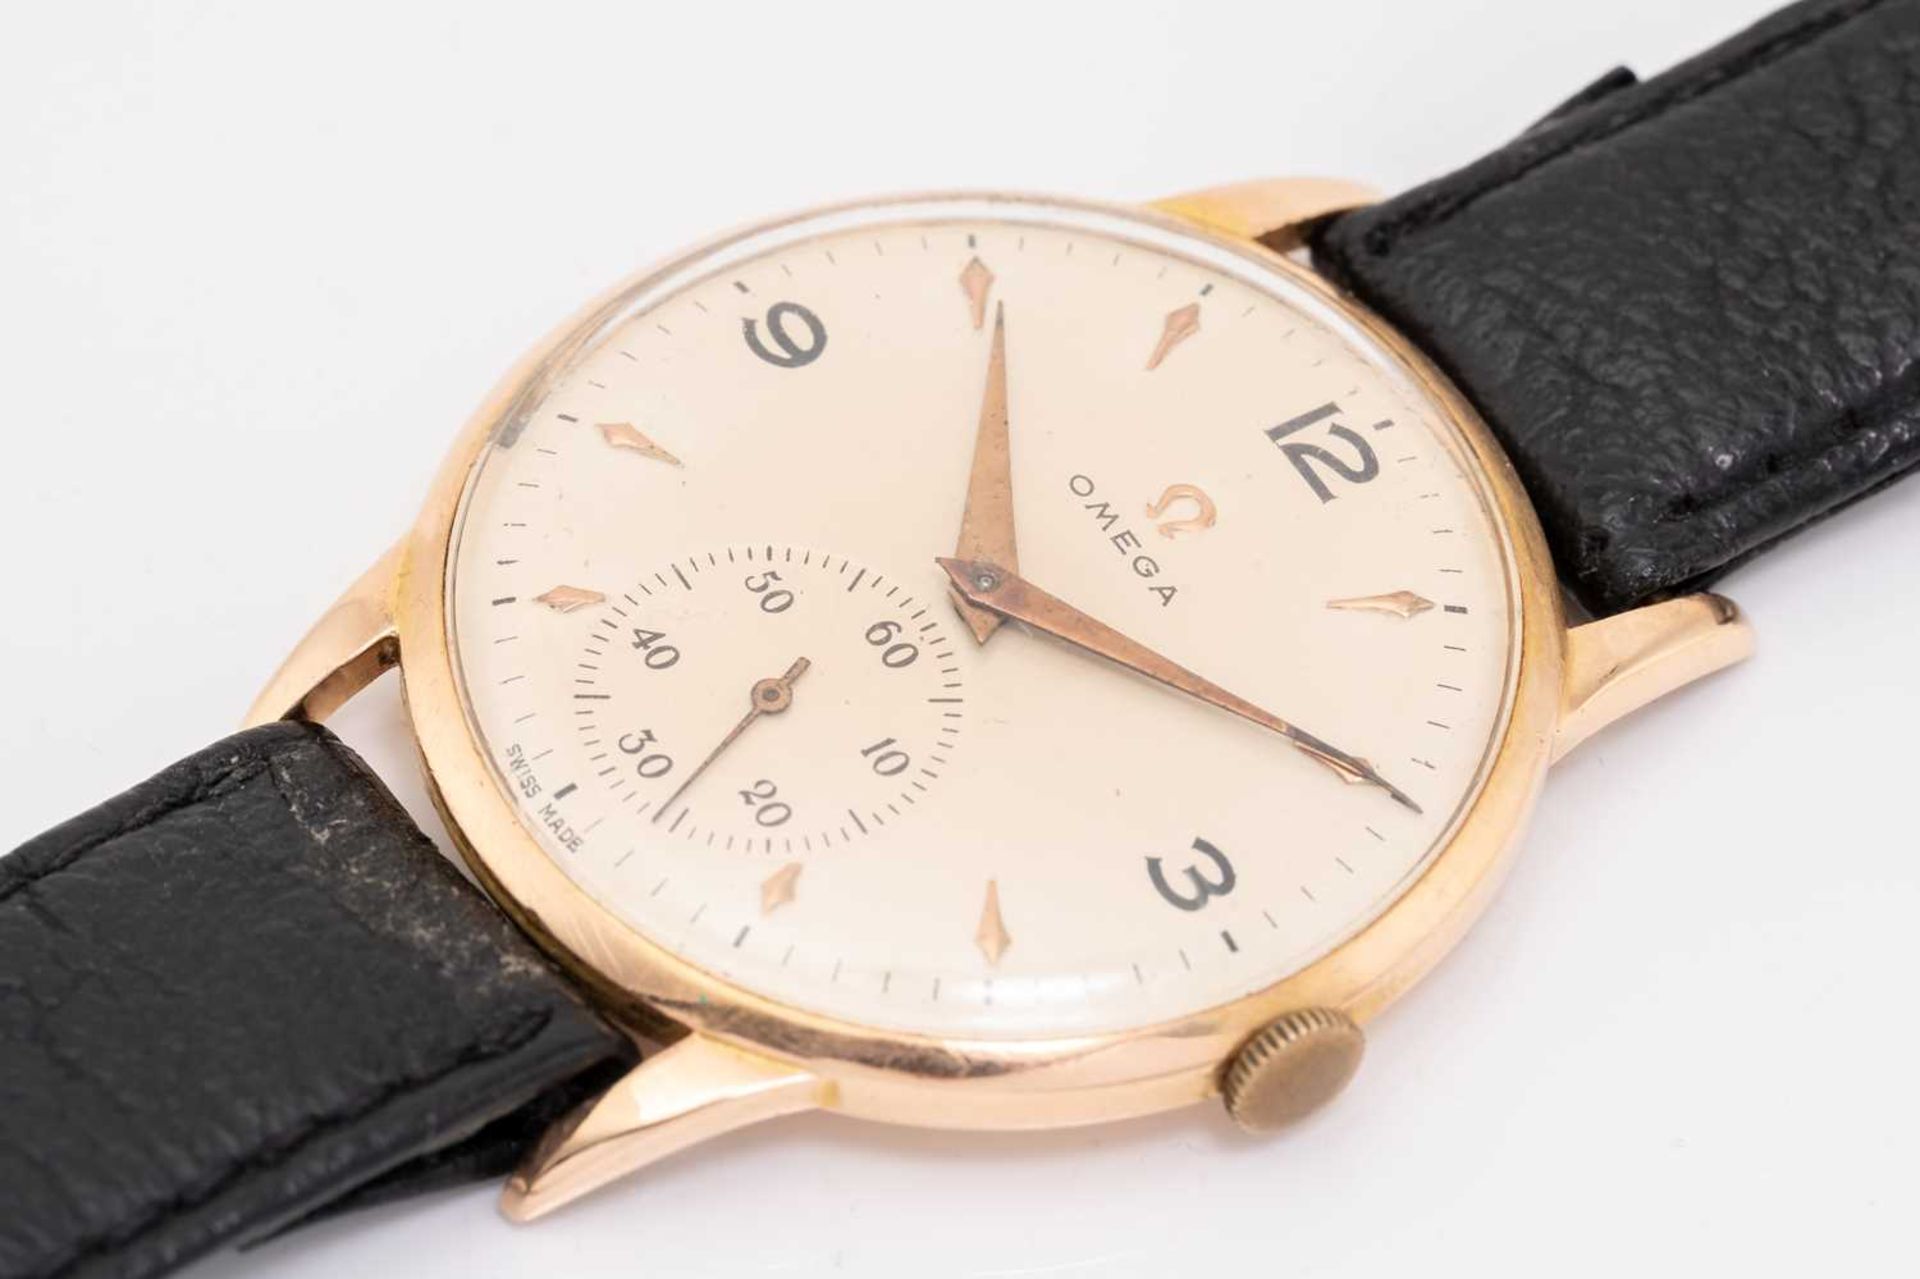 An Omega jumbo in 18ct gold watch, featuring a swiss made hand-wound movement calibre: 265 in a - Bild 2 aus 6